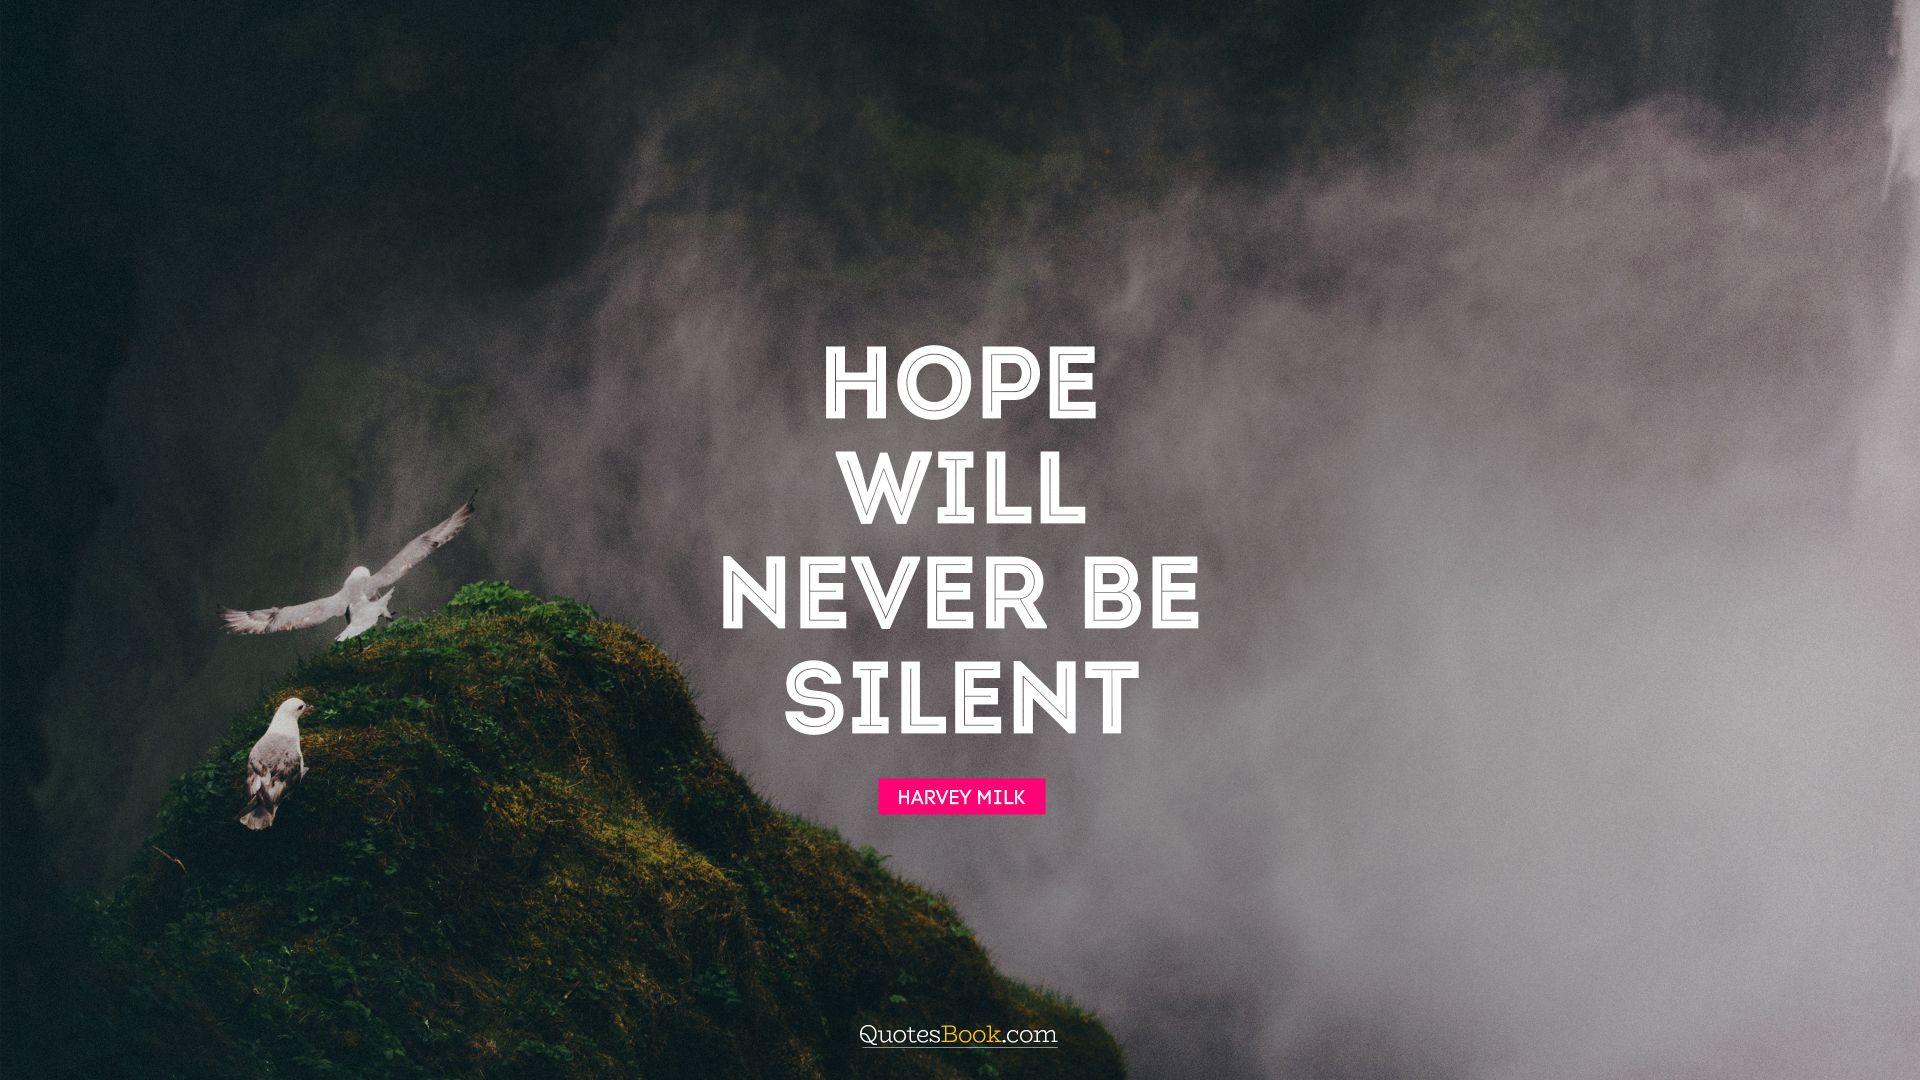 Hope will never be silent. - Quote by Harvey Milk